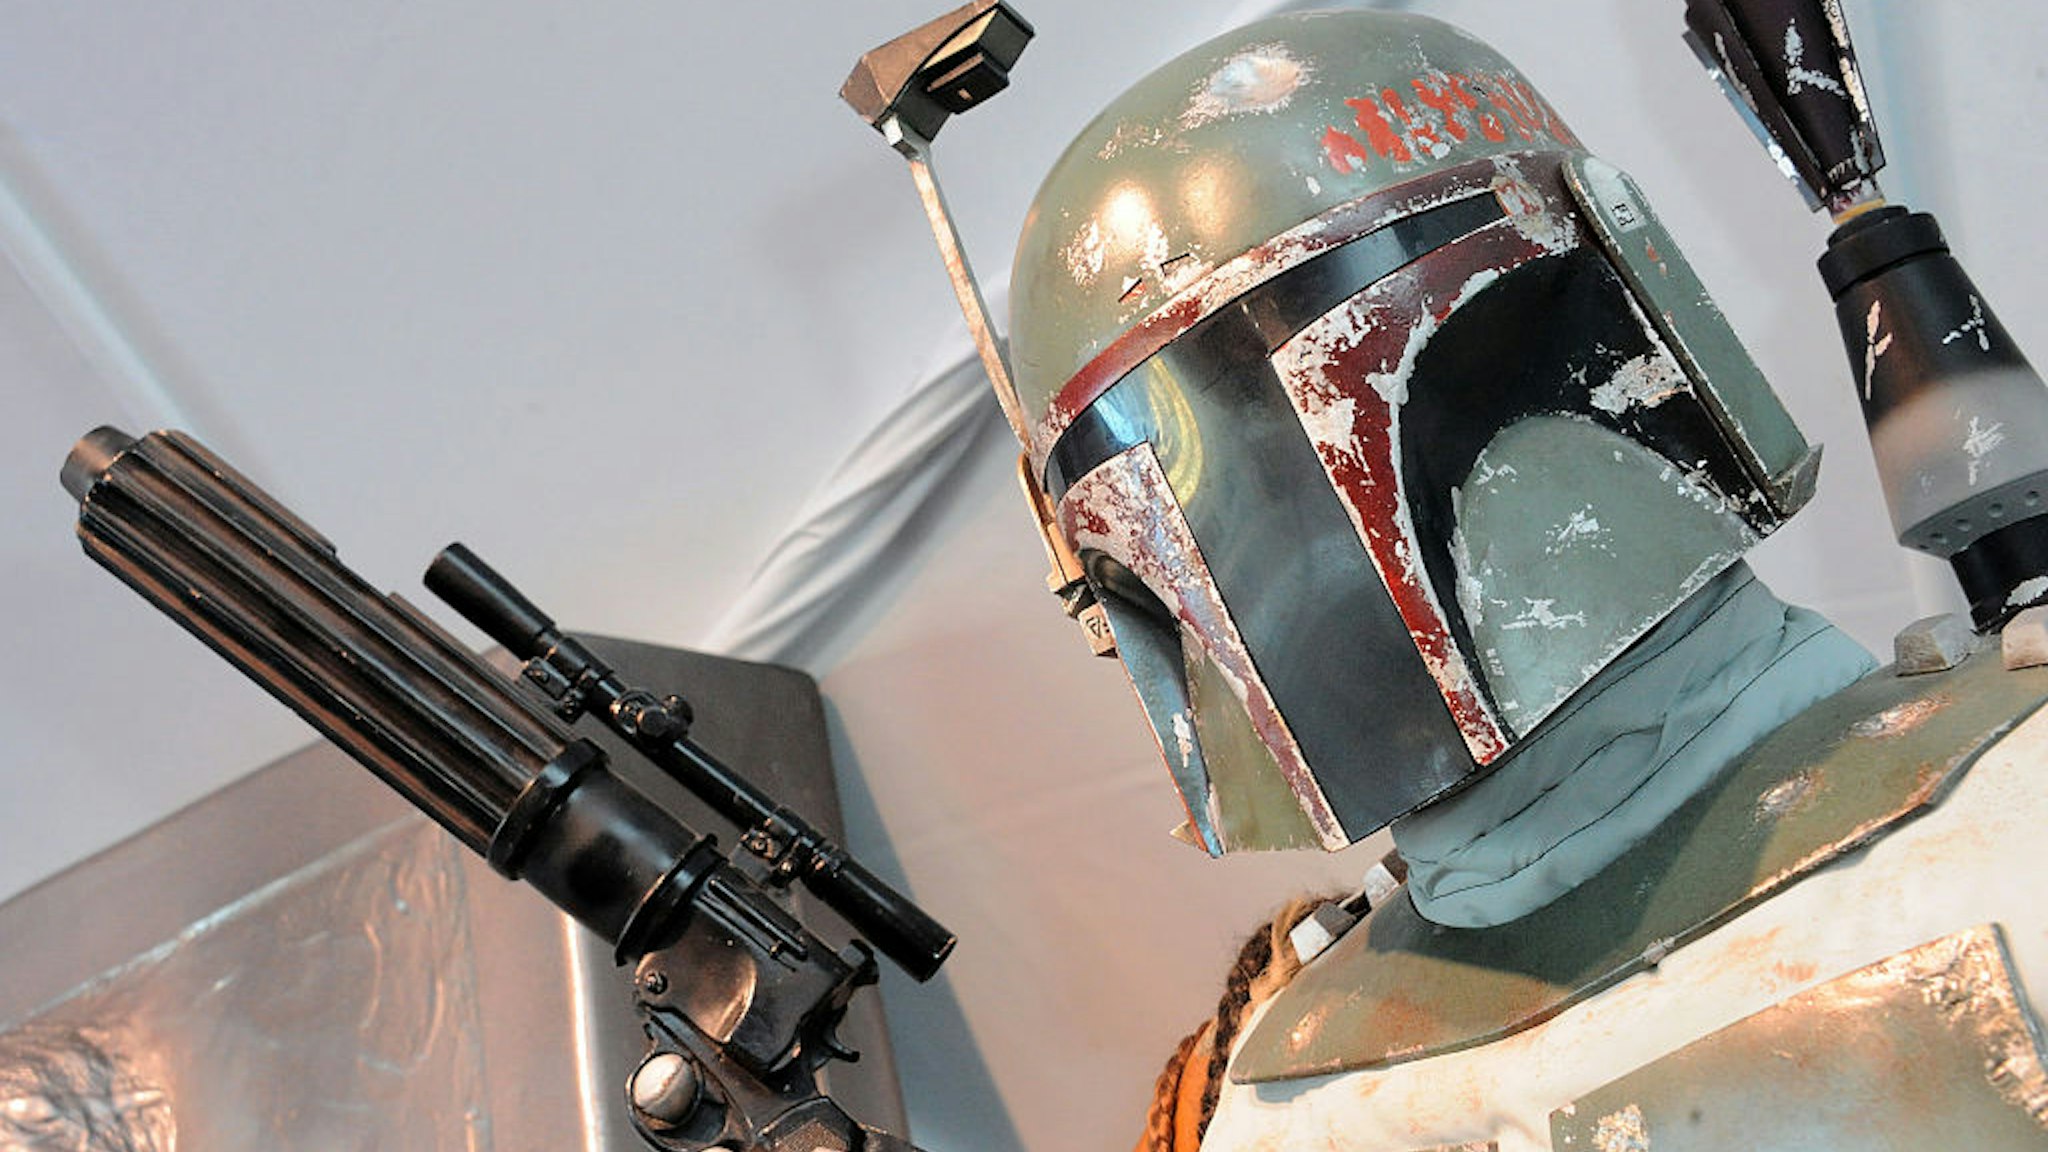 LOS ANGELES, CA - DECEMBER 13: Hollywood Prepares For The Premiere Of Walt Disney Pictures And Lucasfilm's "Star Wars: The Force Awakens" : Boba Fett on display on the 2nd Day of Target's Share The Force held at LA Live on December 13, 2015 in Los Angeles, California. (Photo by Albert L. Ortega/Getty Images)